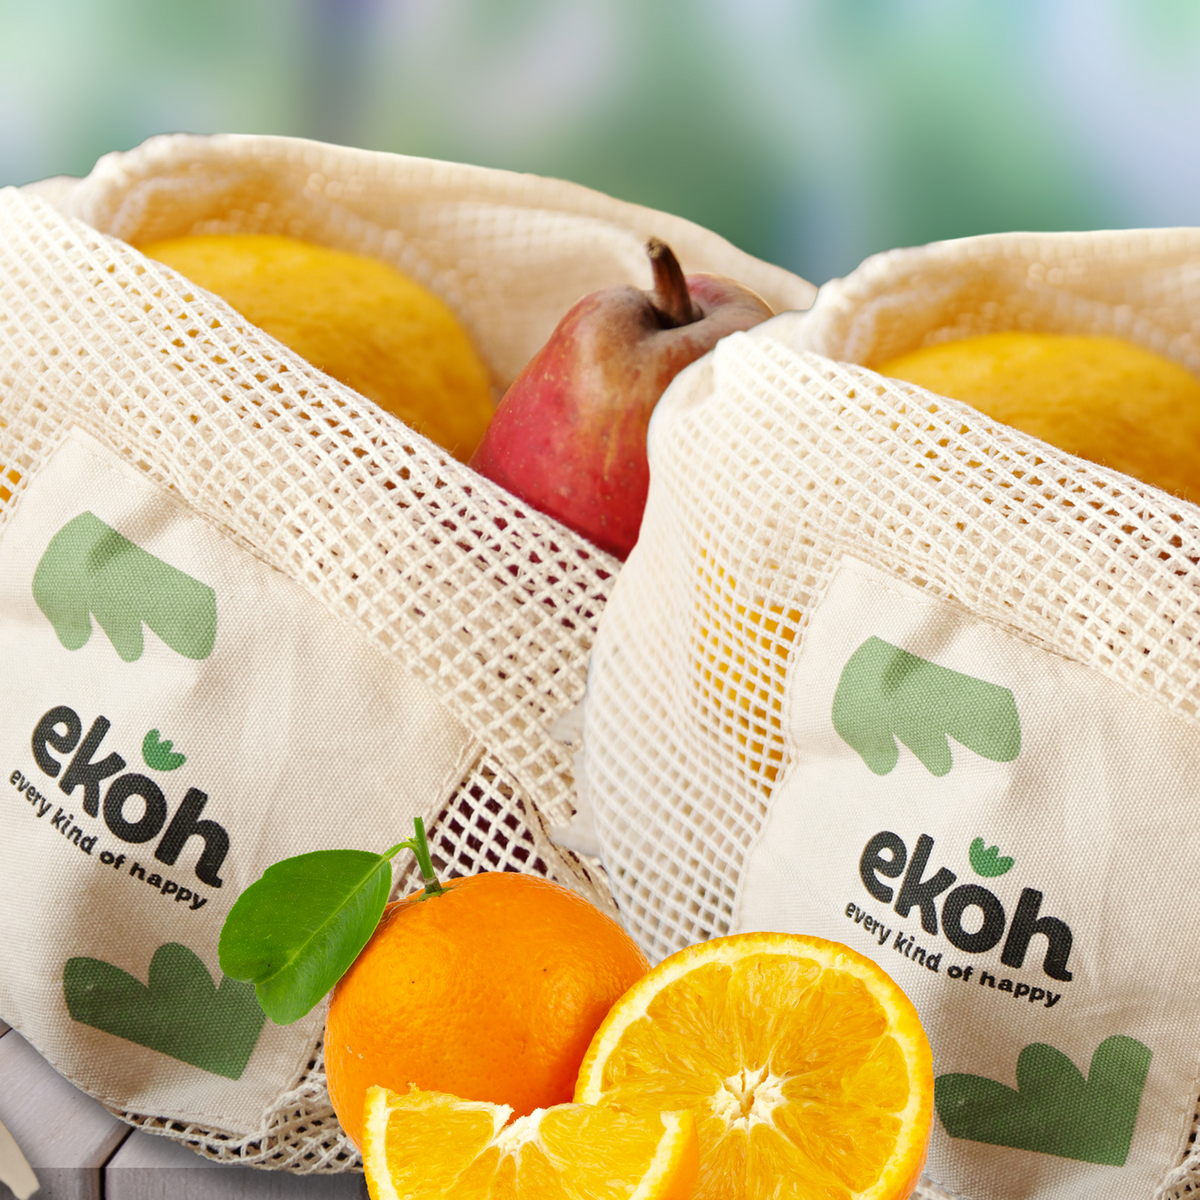 Reduce Your Carbon Footprint with Reusable Produce Bags